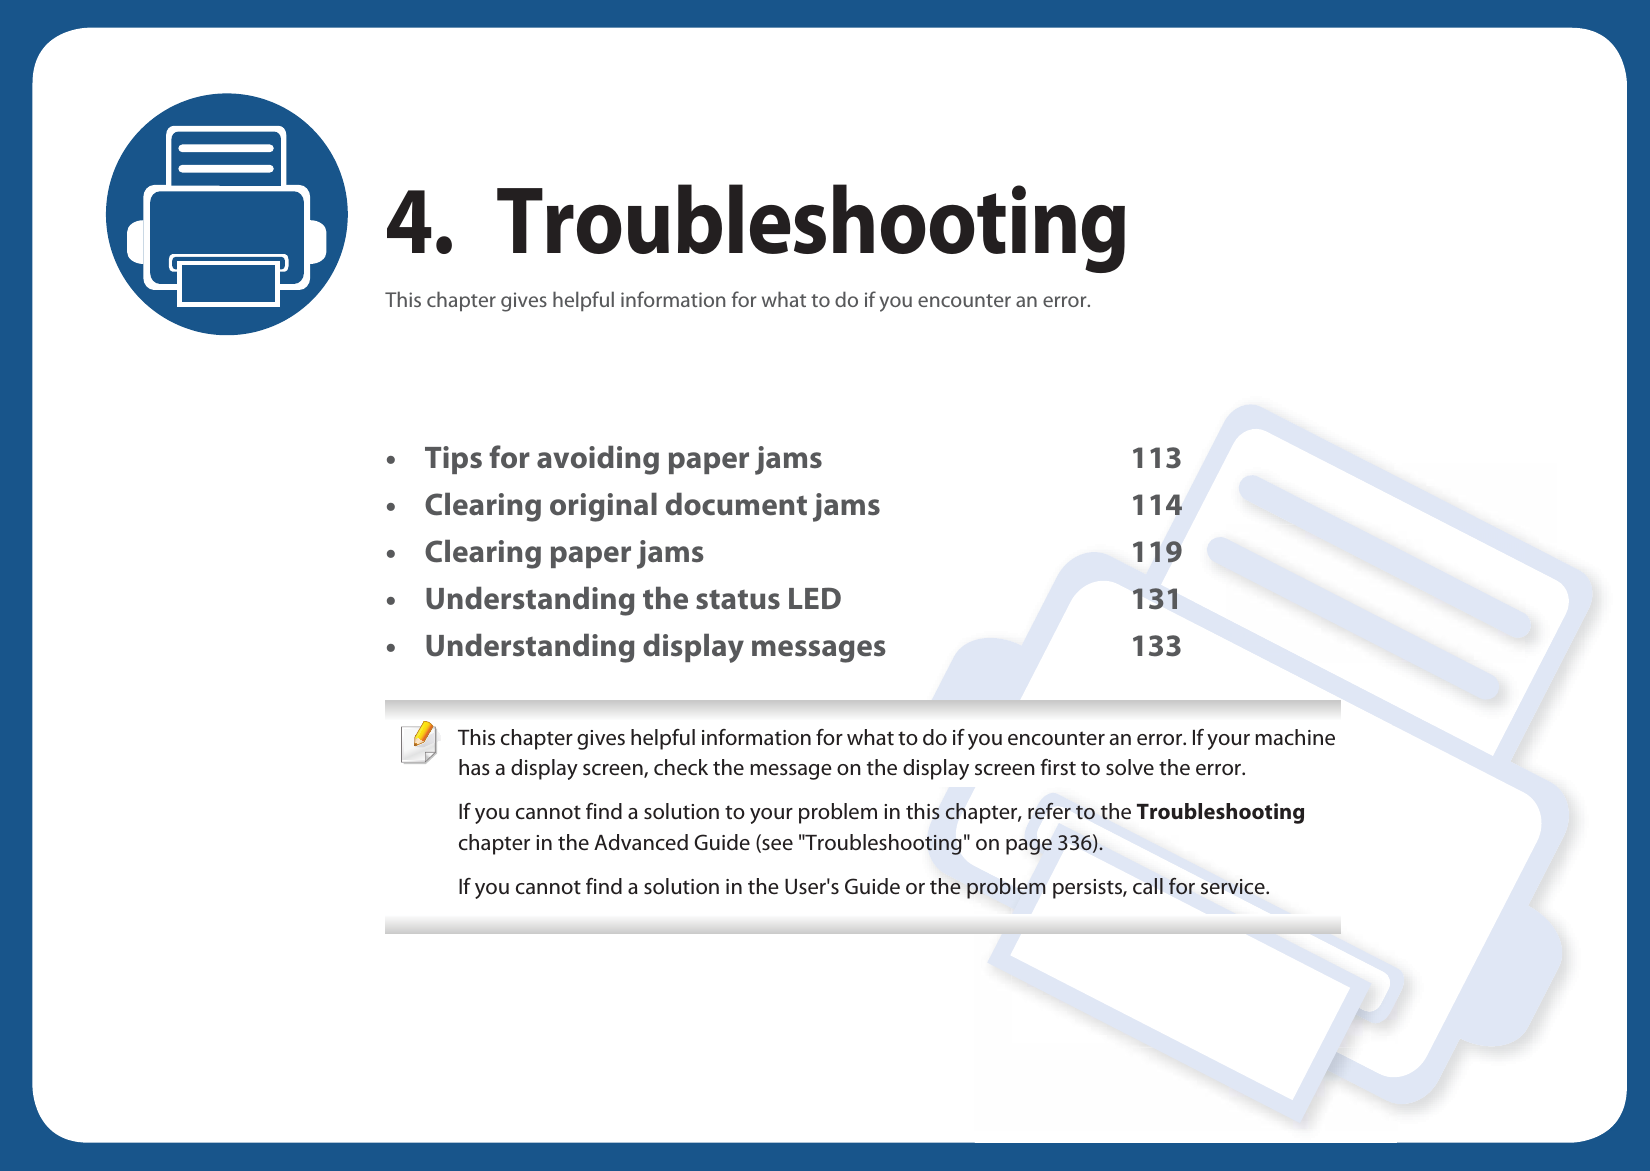 4. TroubleshootingThis chapter gives helpful information for what to do if you encounter an error.• Tips for avoiding paper jams 113• Clearing original document jams 114• Clearing paper jams 119• Understanding the status LED 131• Understanding display messages 133 This chapter gives helpful information for what to do if you encounter an error. If your machine has a display screen, check the message on the display screen first to solve the error.If you cannot find a solution to your problem in this chapter, refer to the Troubleshooting chapter in the Advanced Guide (see &quot;Troubleshooting&quot; on page 336).If you cannot find a solution in the User&apos;s Guide or the problem persists, call for service.  